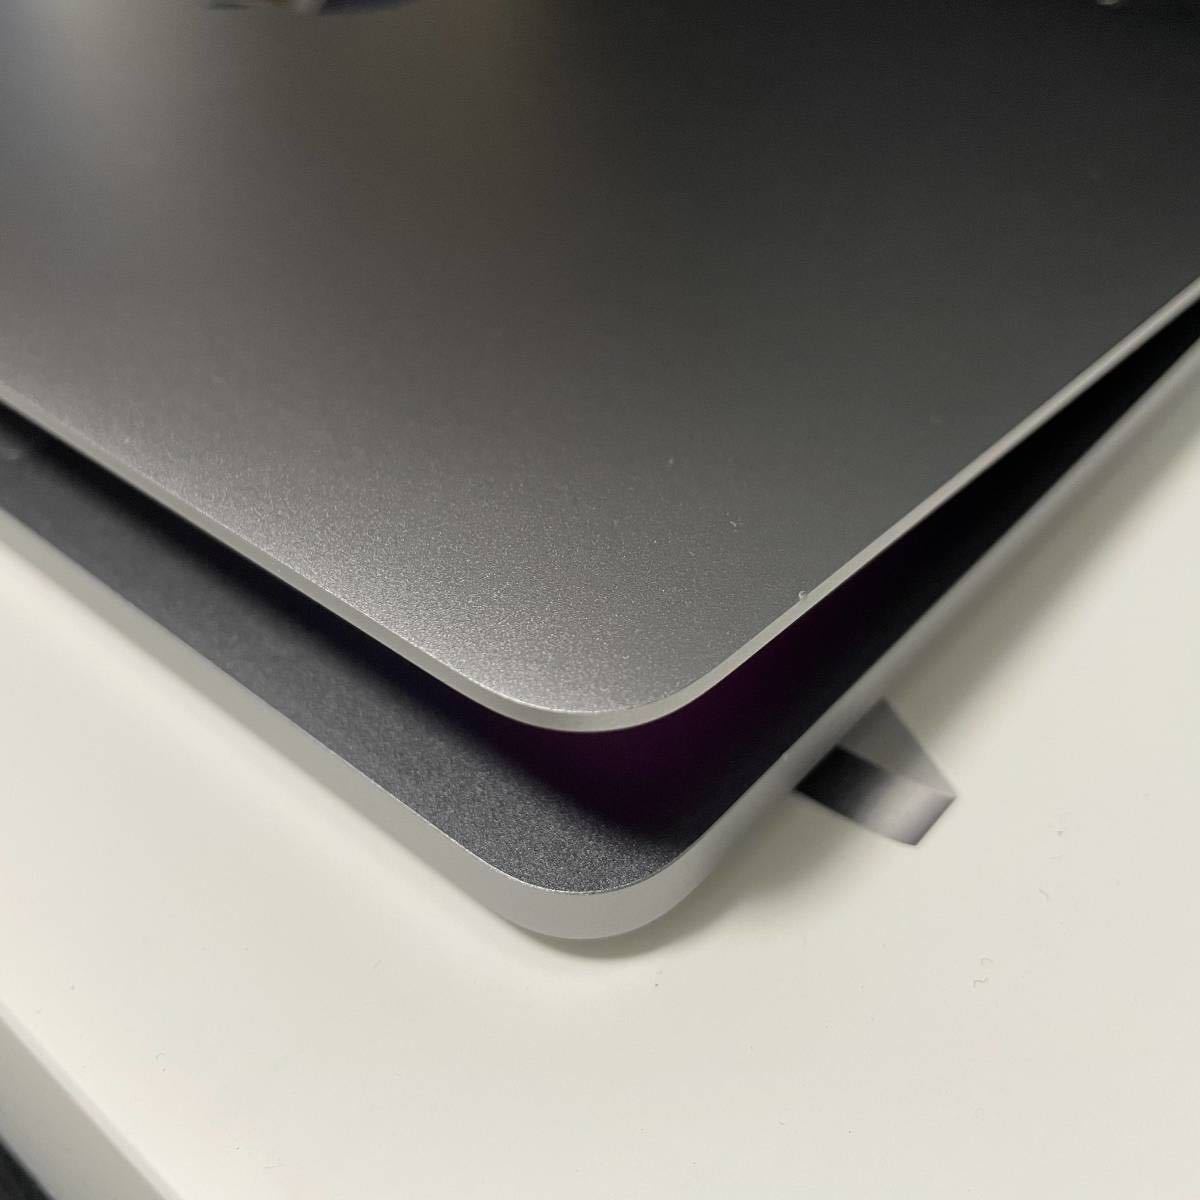 MacBook Pro (13-inch, 2016, Two Thunderbolt Ports) A1708 ジャンク ...